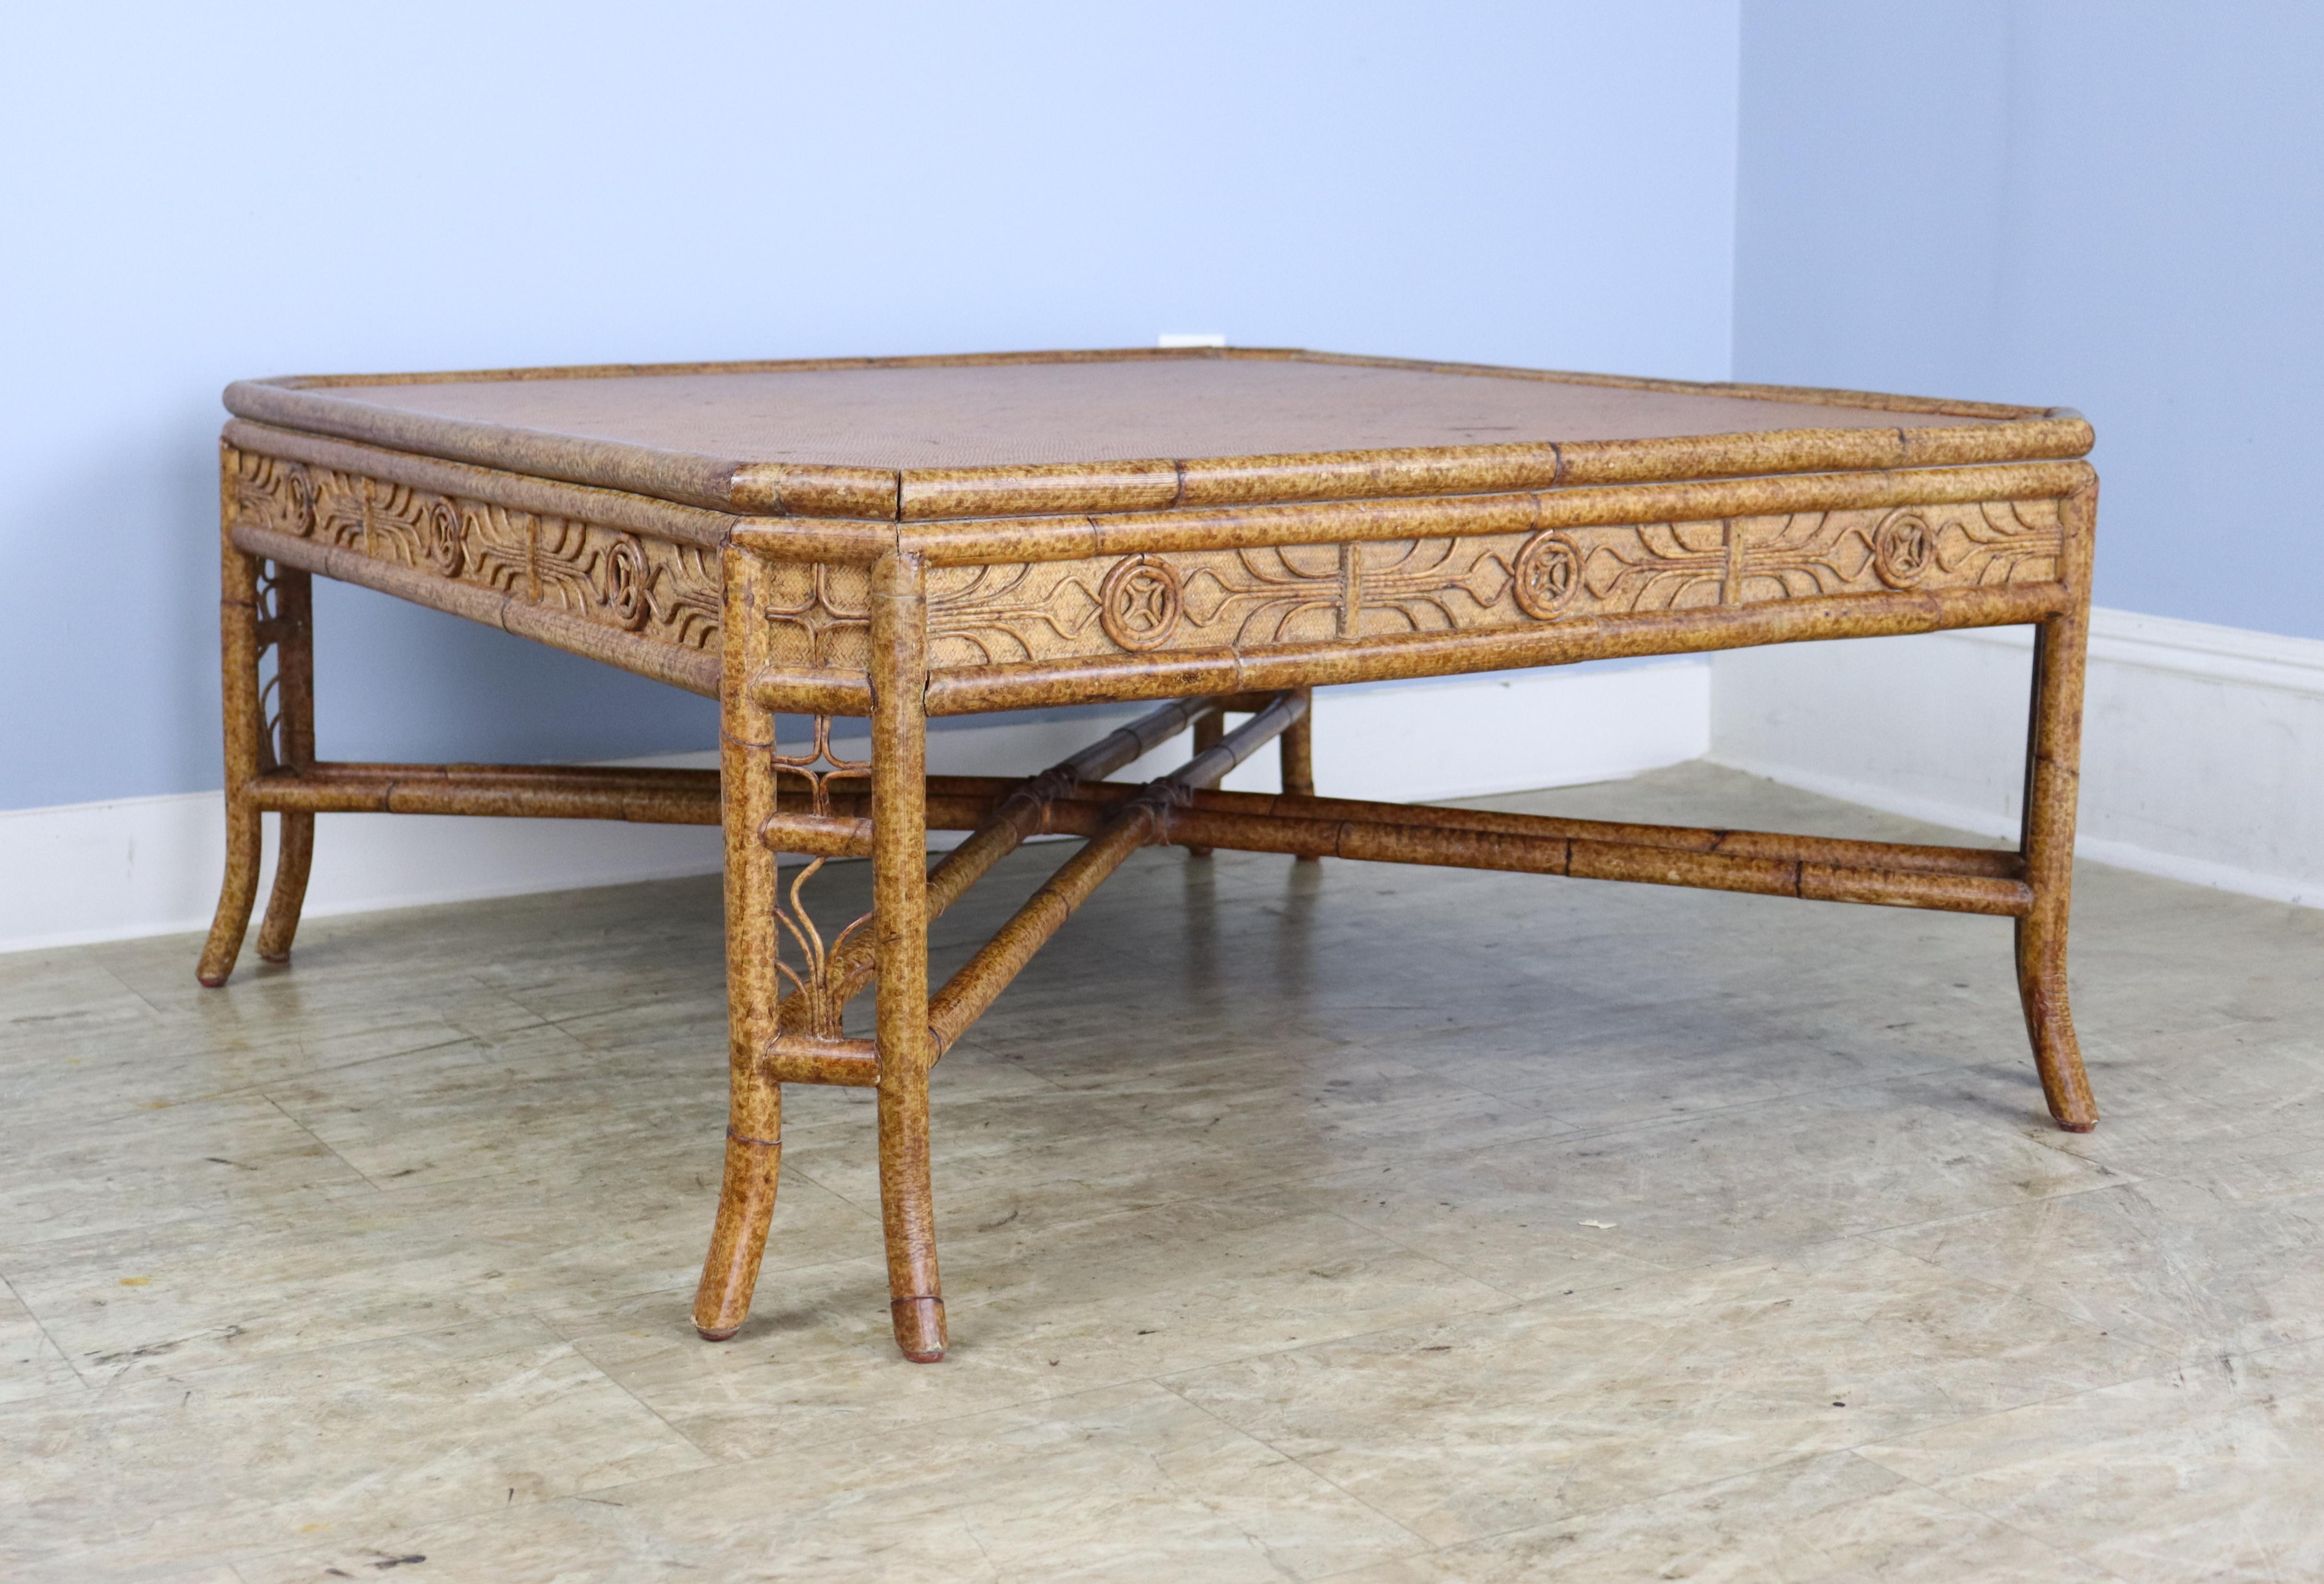 A whimsical square bamboo coffee table, decorated with lots of good bamboo details all the way around the top.  The woven rattan top has som areas of wear, shown.  Otherwise, the piece is quite sturdy and in good condition.